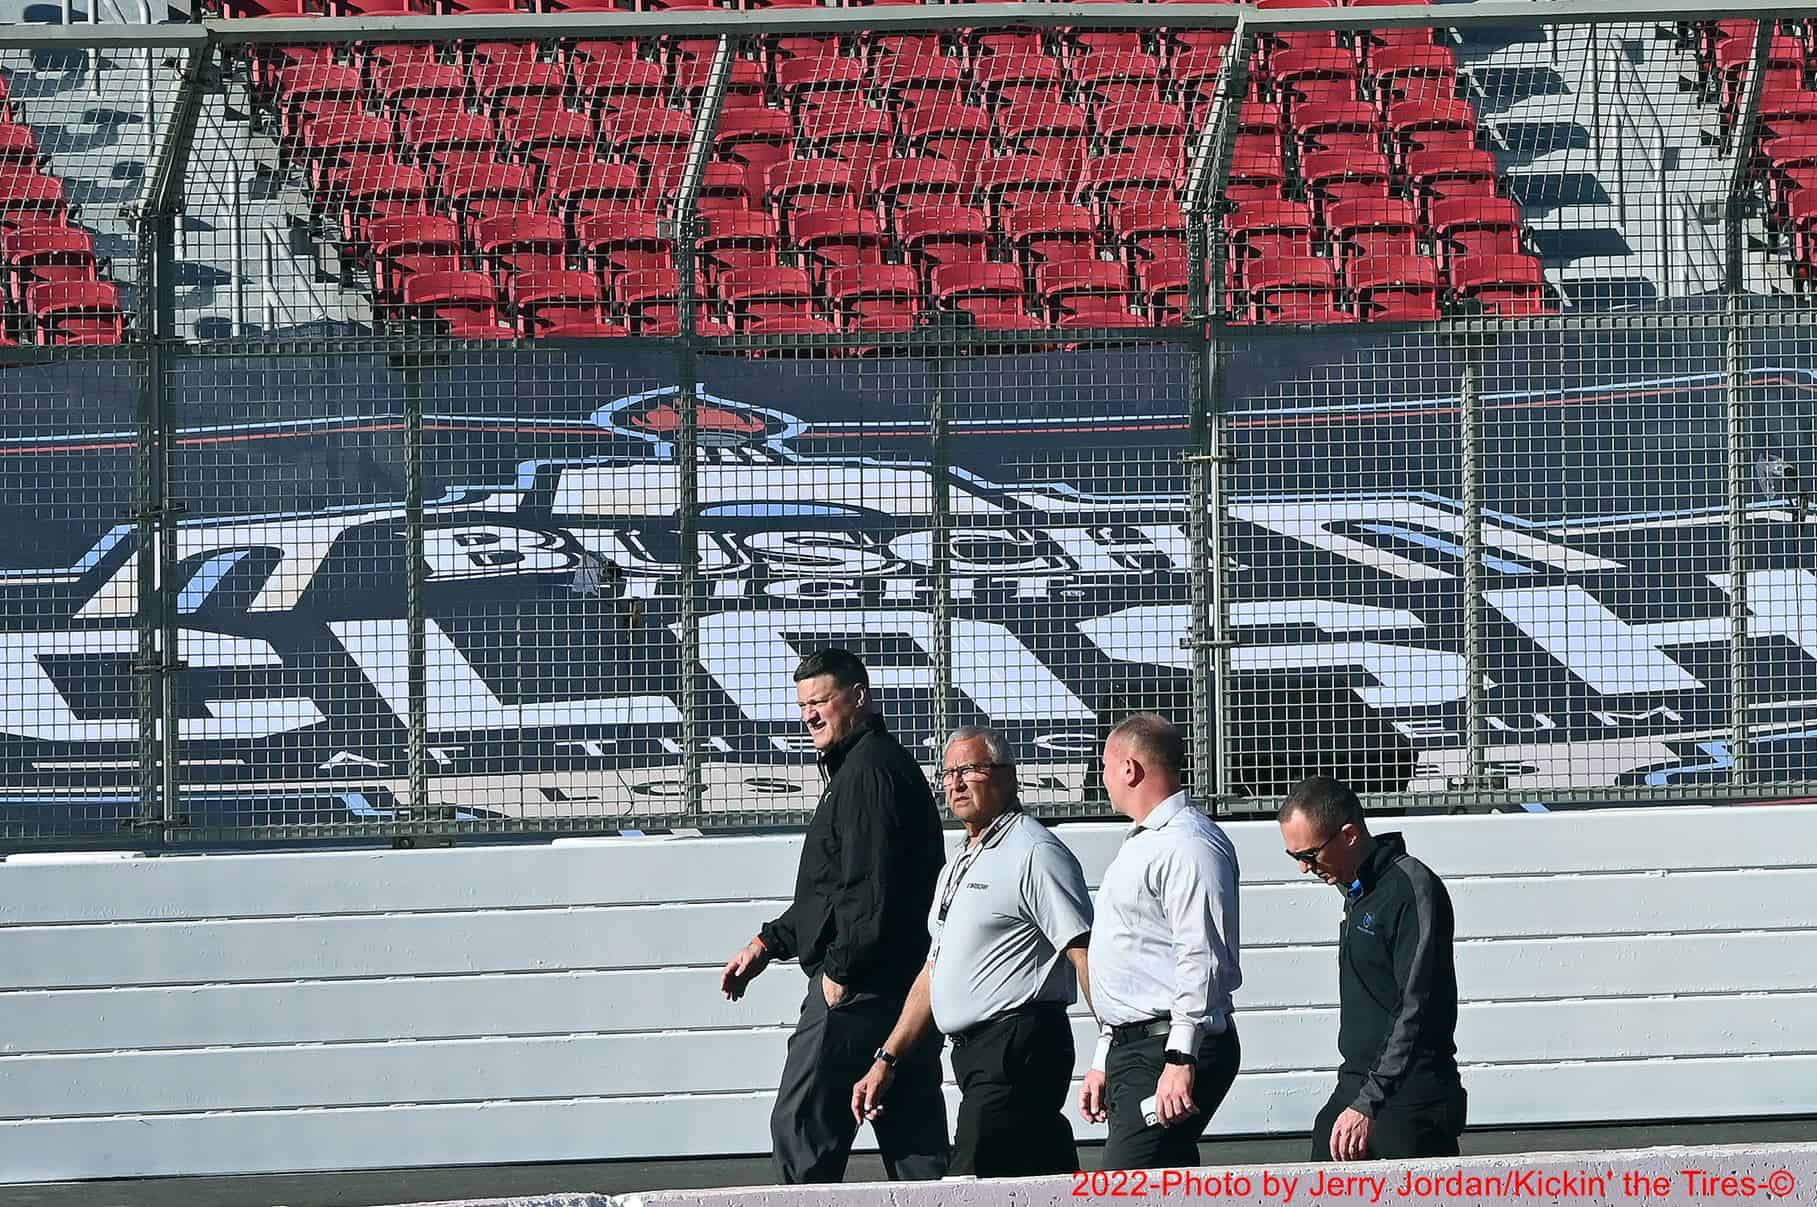 A group of nascar's racing competition team, including steve o'donnell, nascar executive vice president and chief racing development officer, walk the track inside the los angeles memorial coliseum. Photo by jerry jordan/kickin' the tires